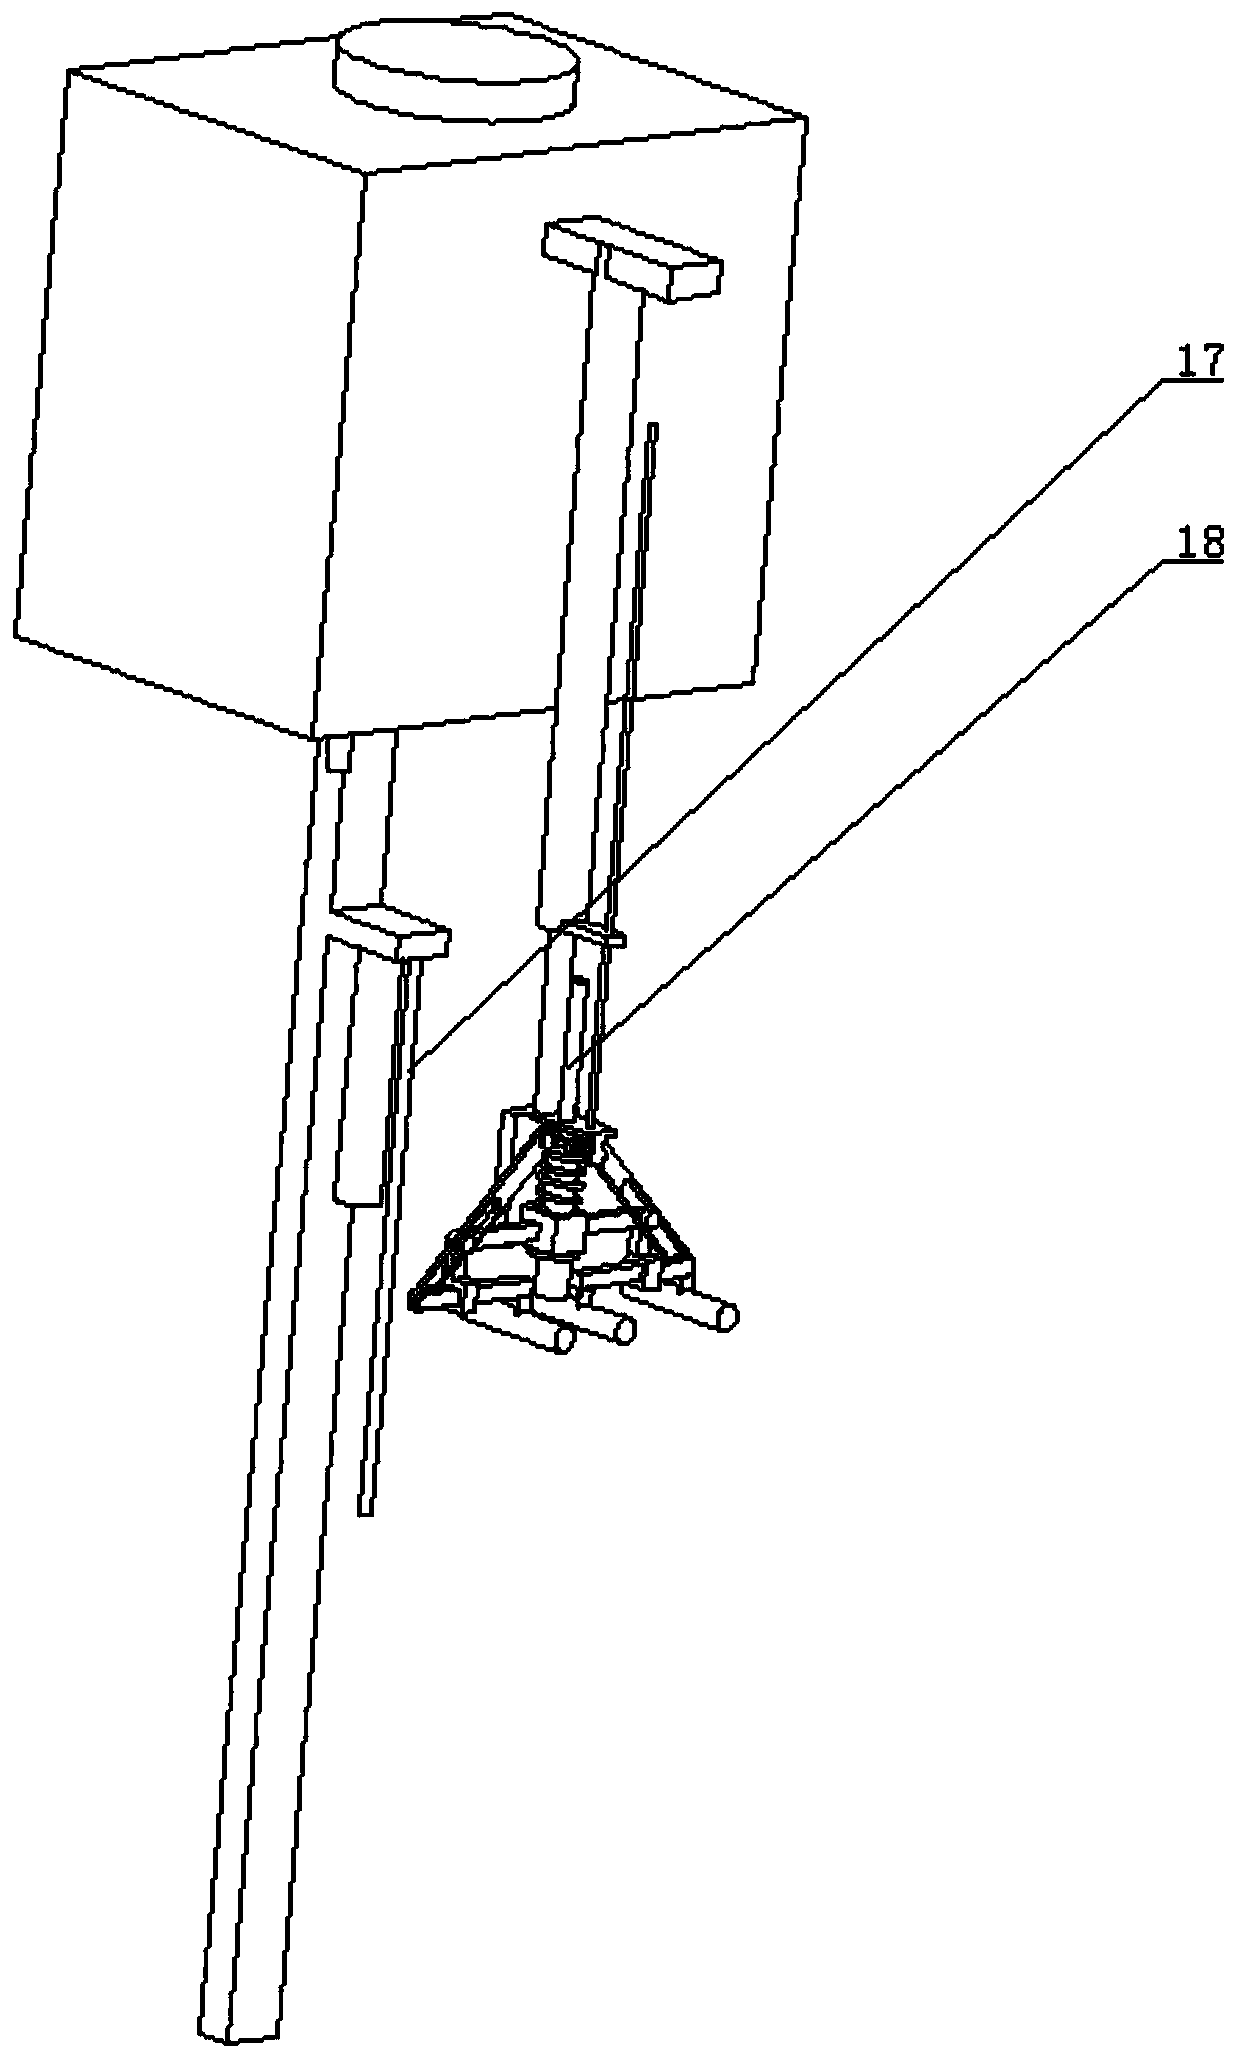 Rice processing device